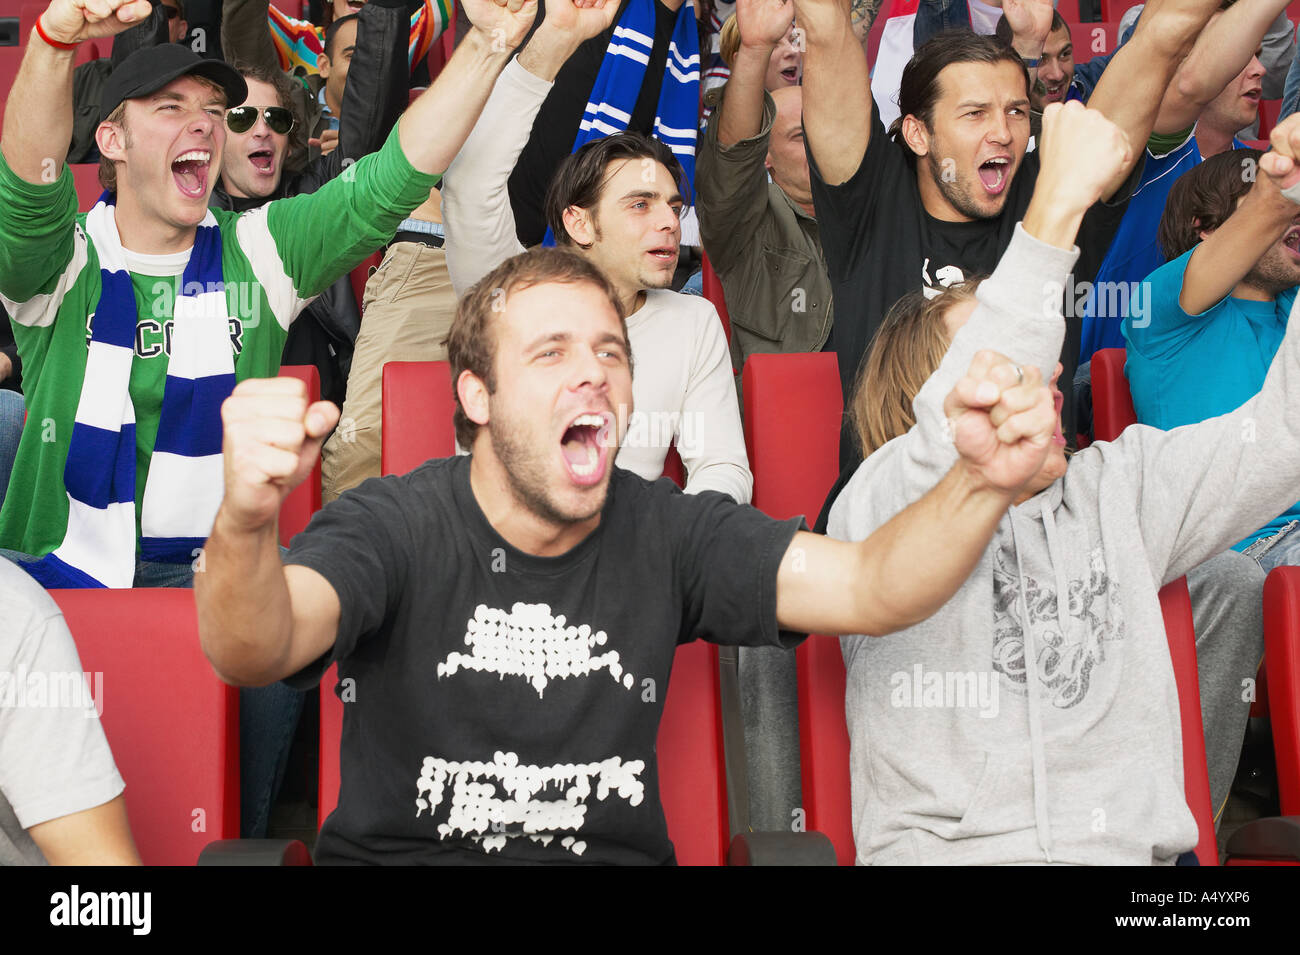 Football Crowd High Resolution Stock Photography and Images - Alamy